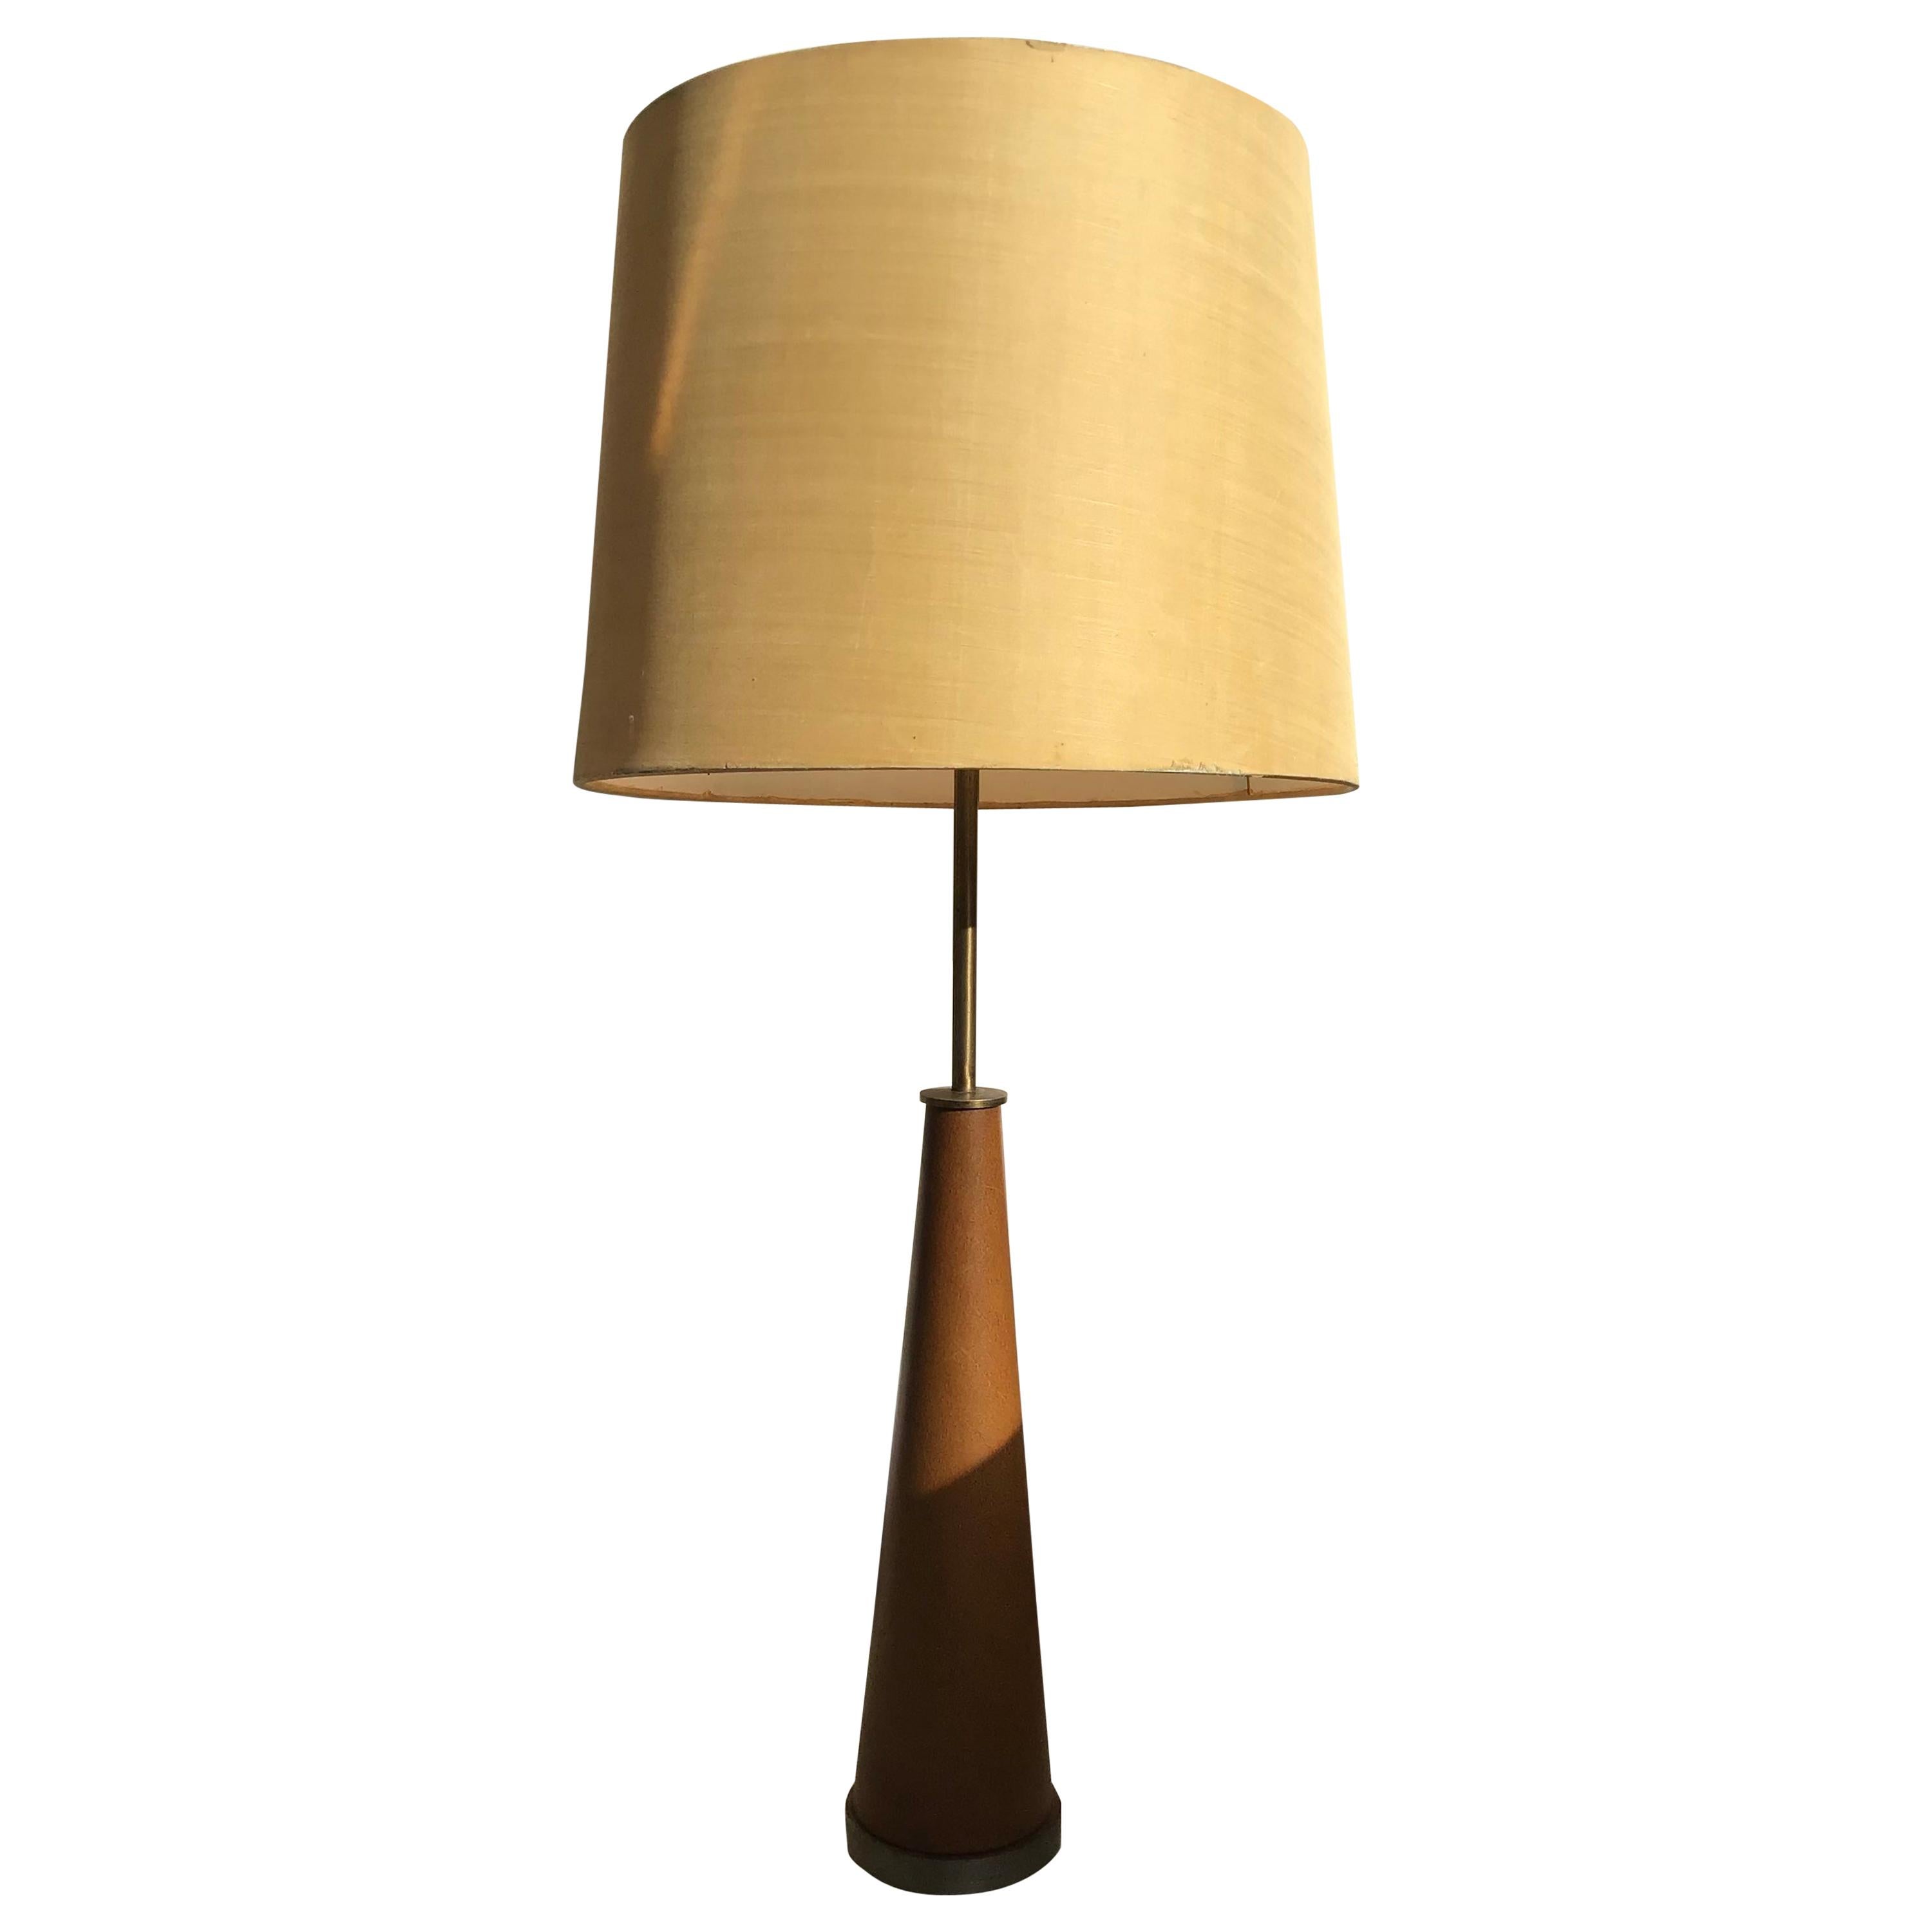 Stilnovo Style Table Lamp Metal Crome Skin Fabric Lampshade, 1950, Italy